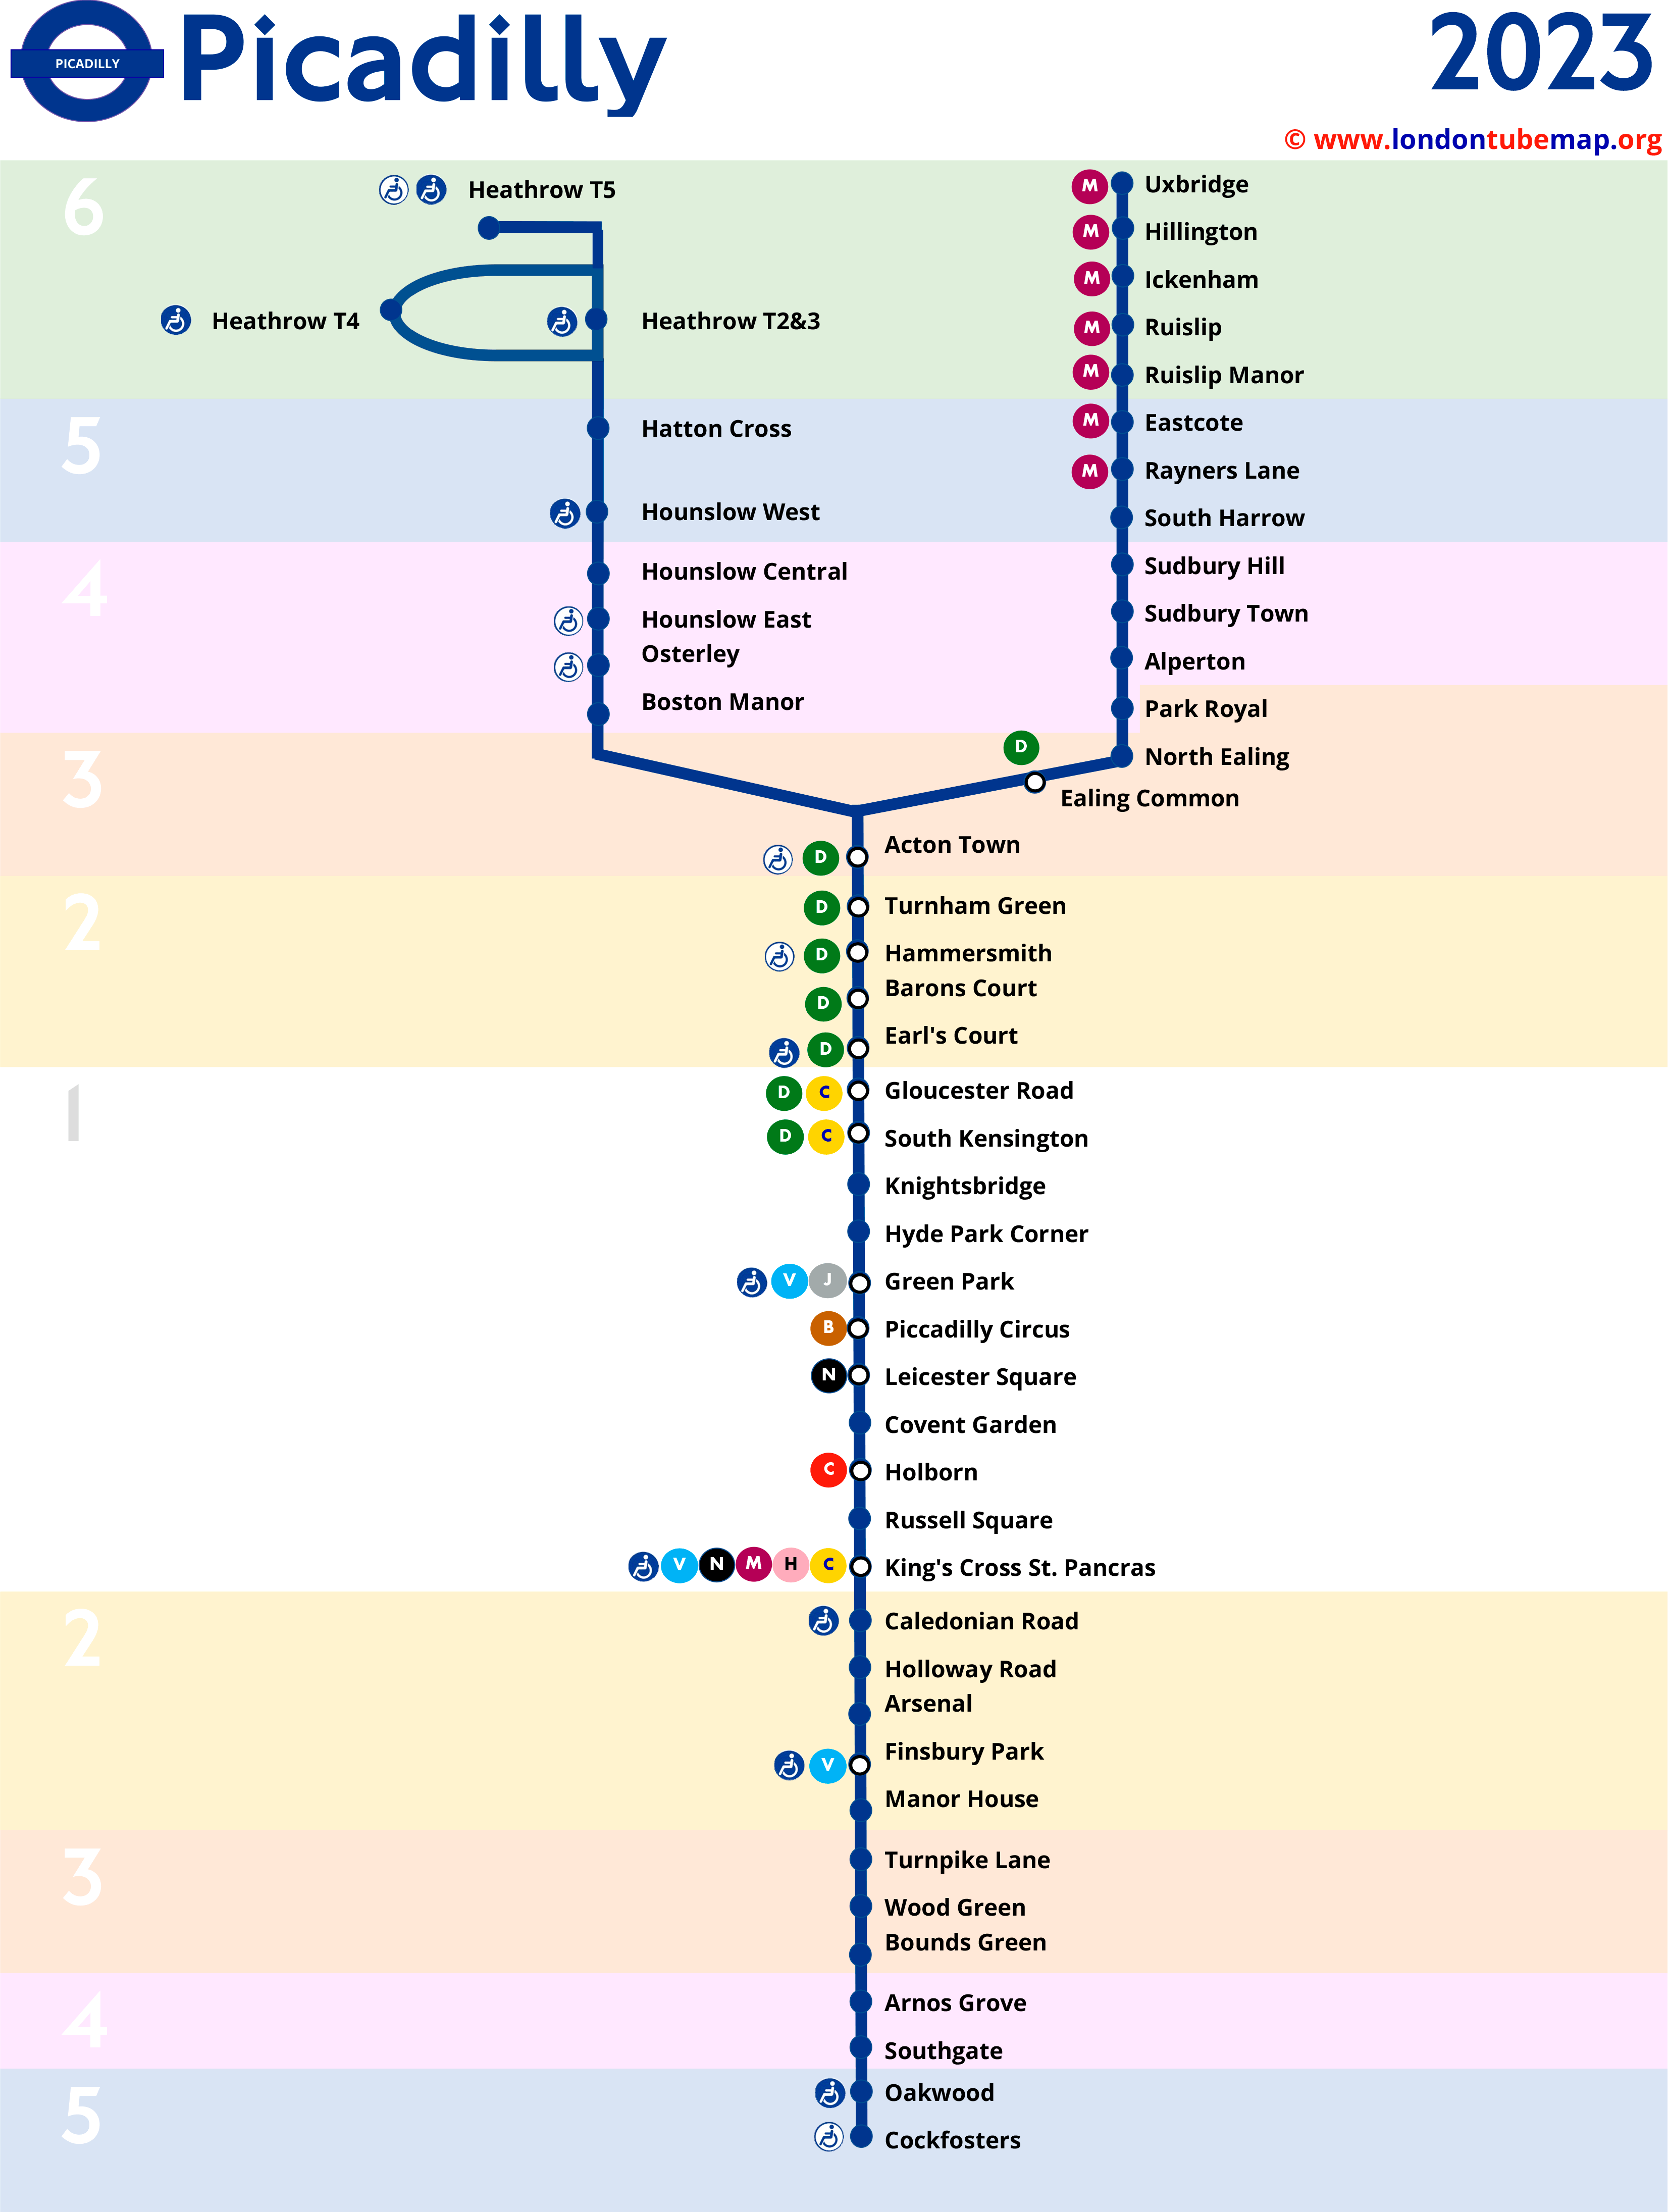 Piccadilly tube line map 2023